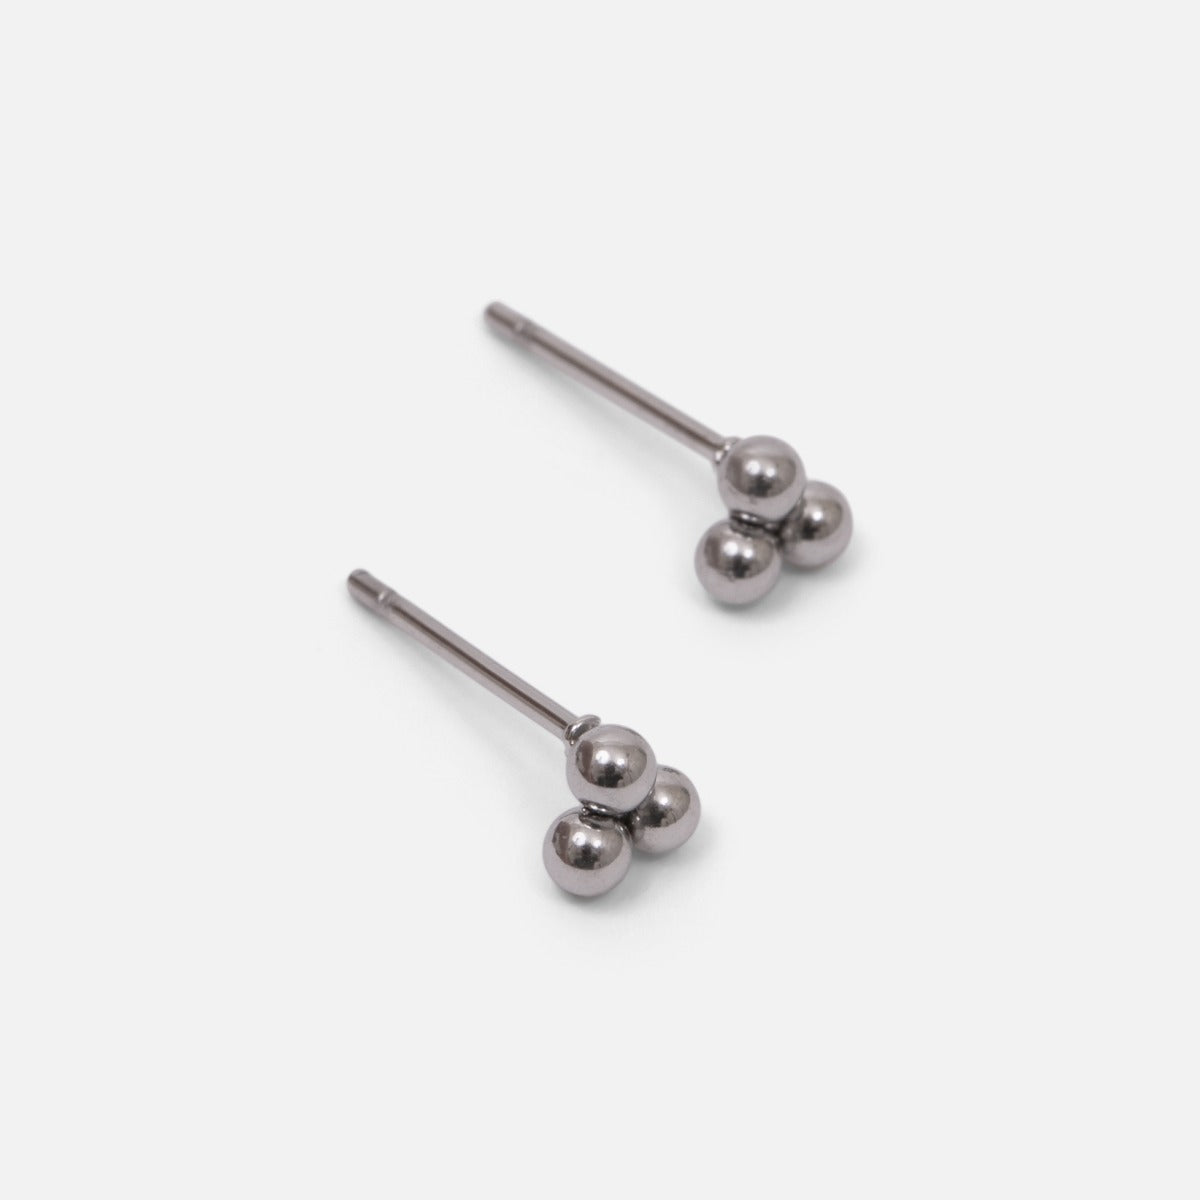 Set of three silver stainless steel stud earrings with hoops and beads